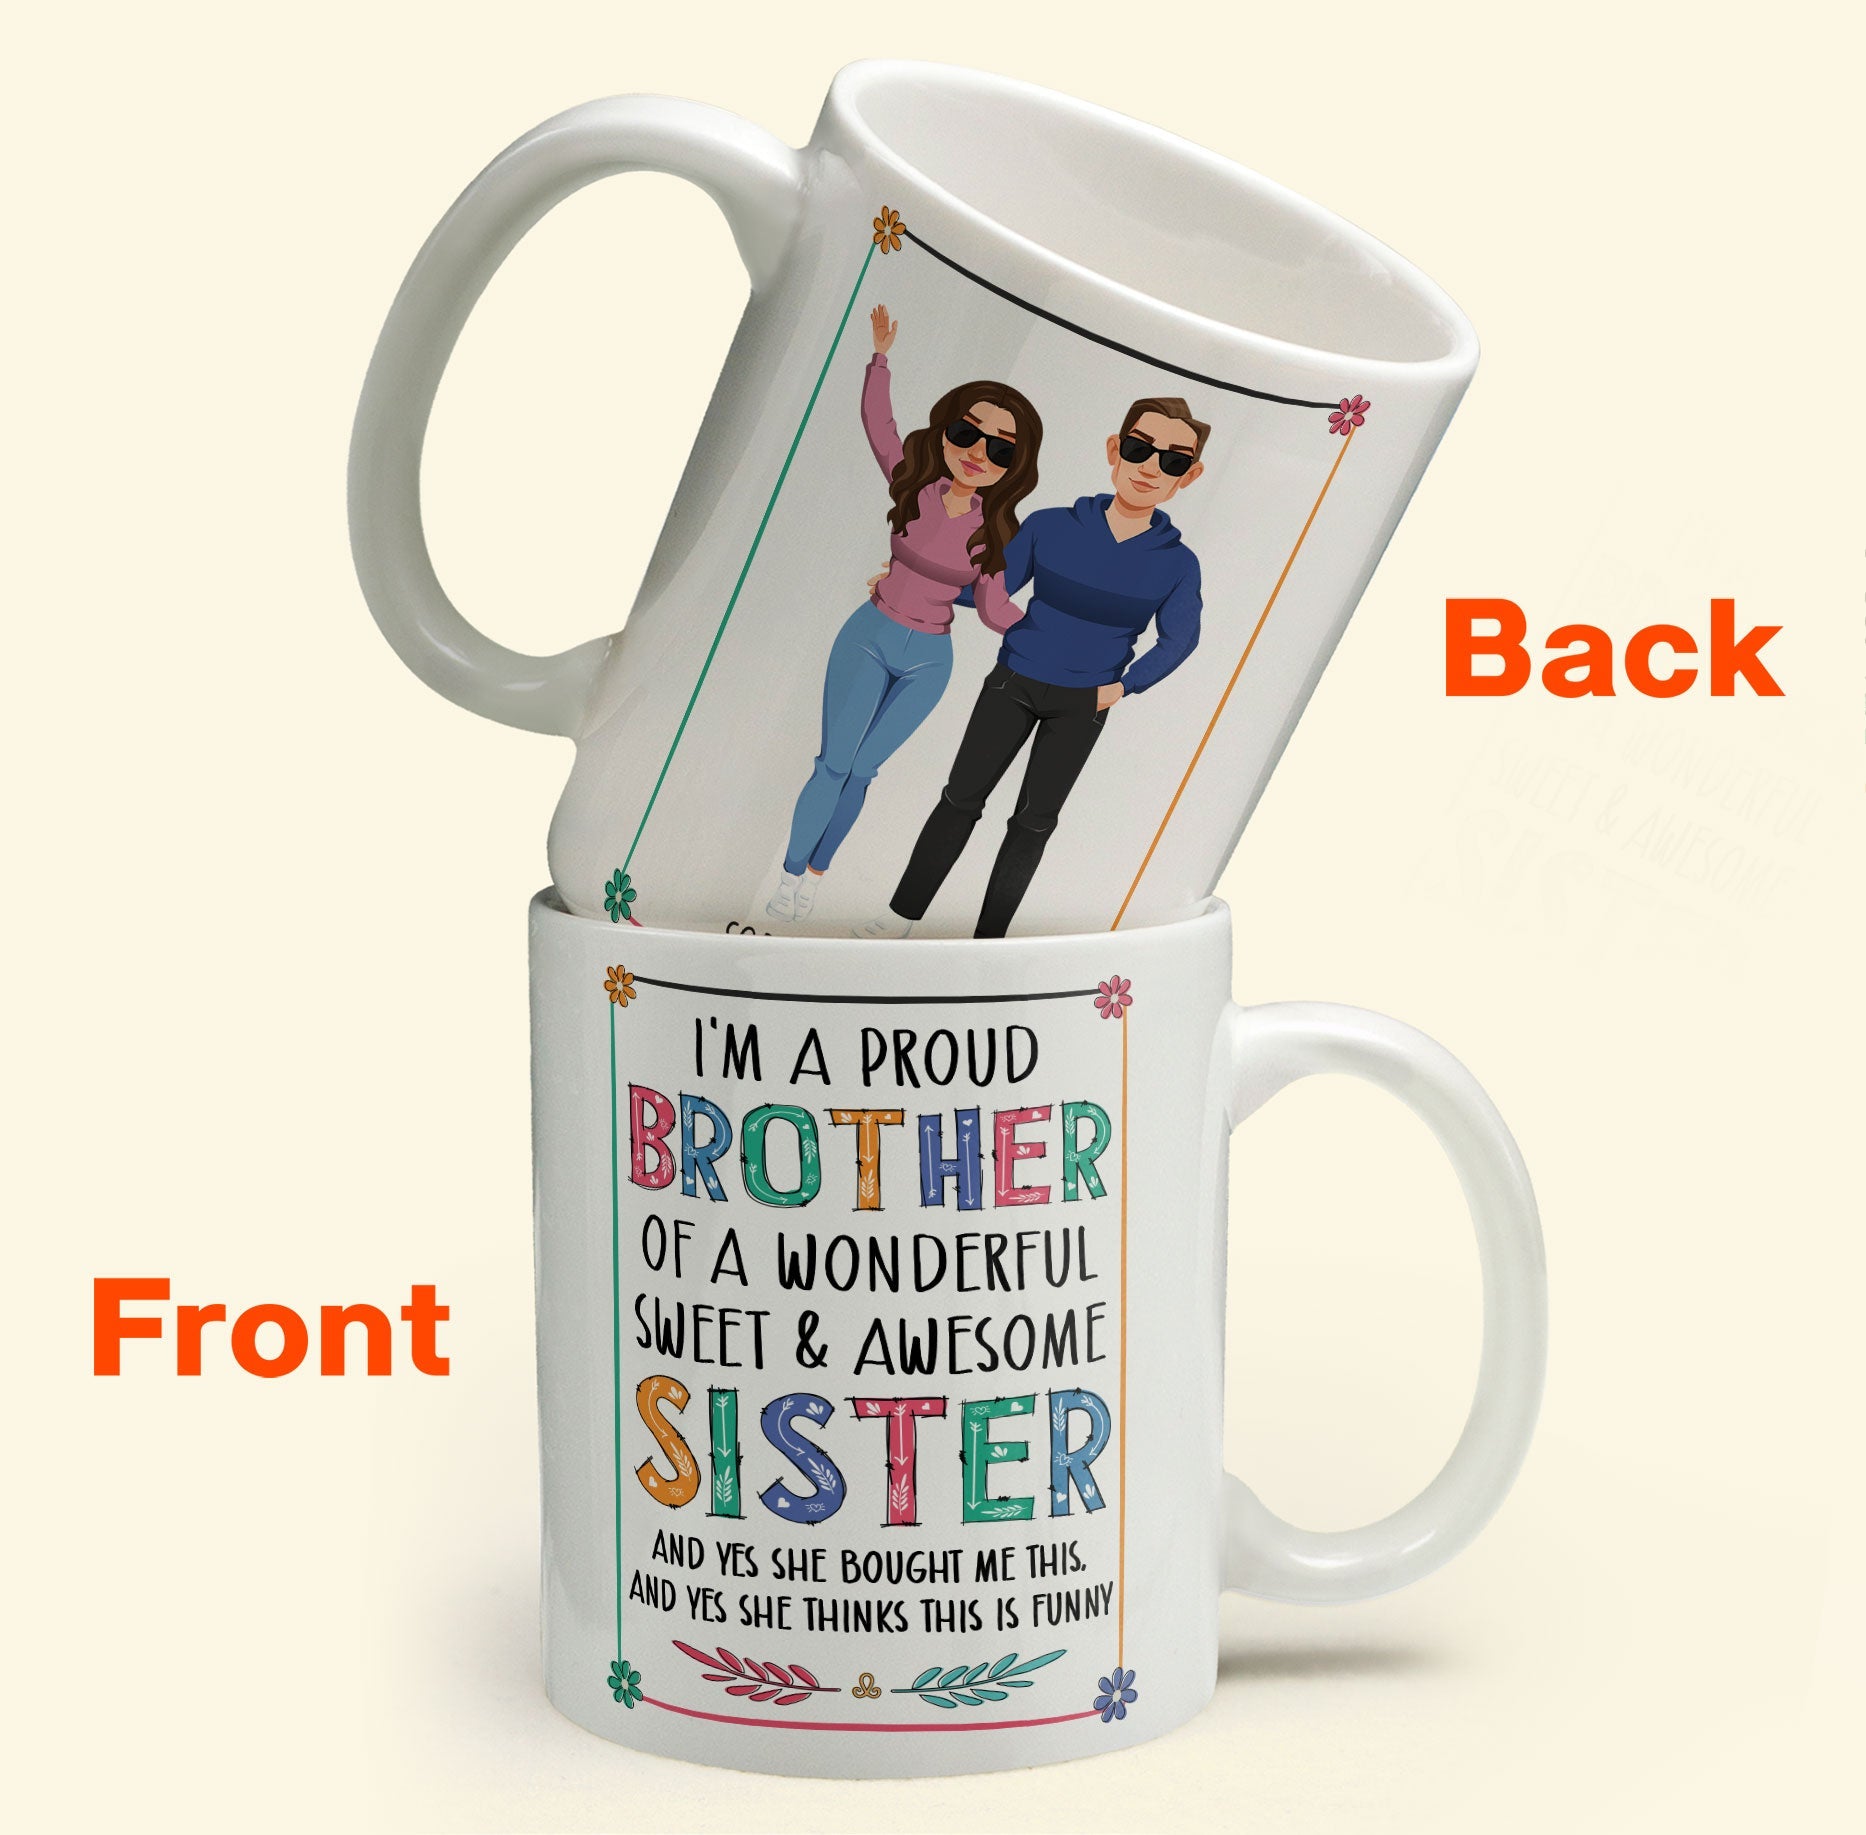 Personalized Bro & Sis Mug - Brother and Sister, Together as Friends